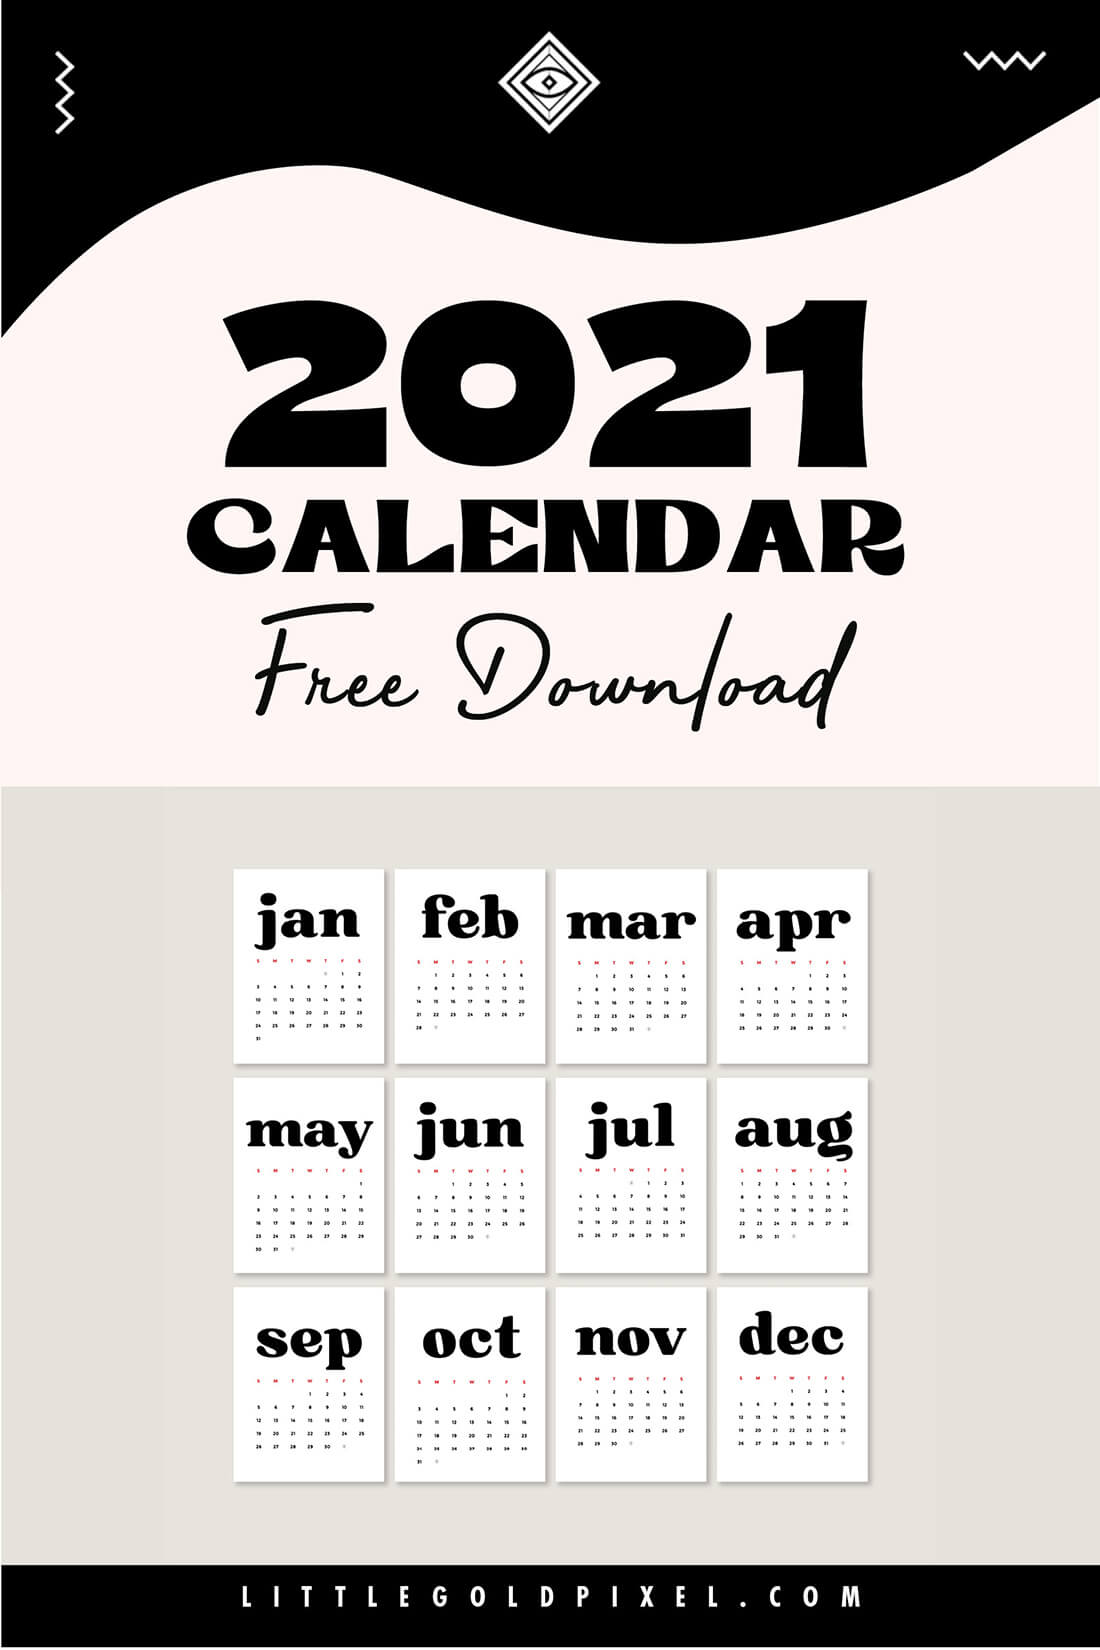 Little Gold Pixel • Free Printable 2021 Calendar • Download and print today!